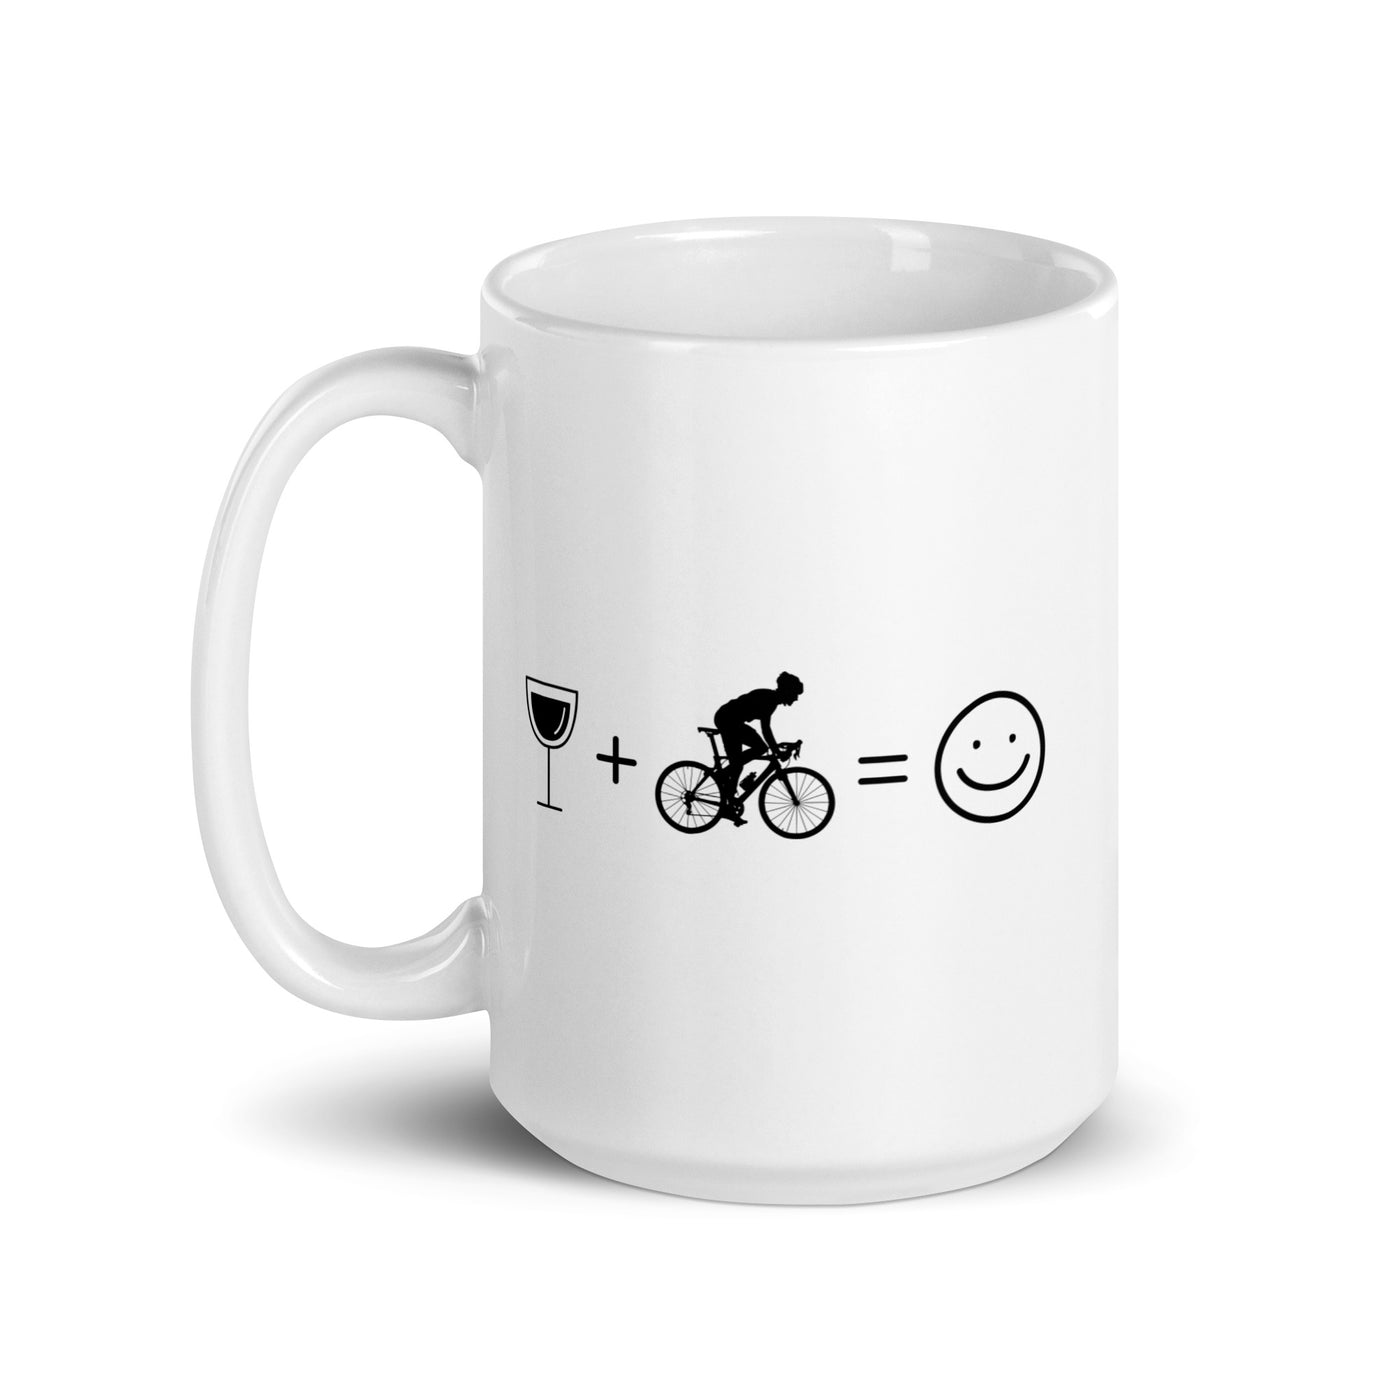 Wine Smile Face And Cycling 1 - Tasse fahrrad